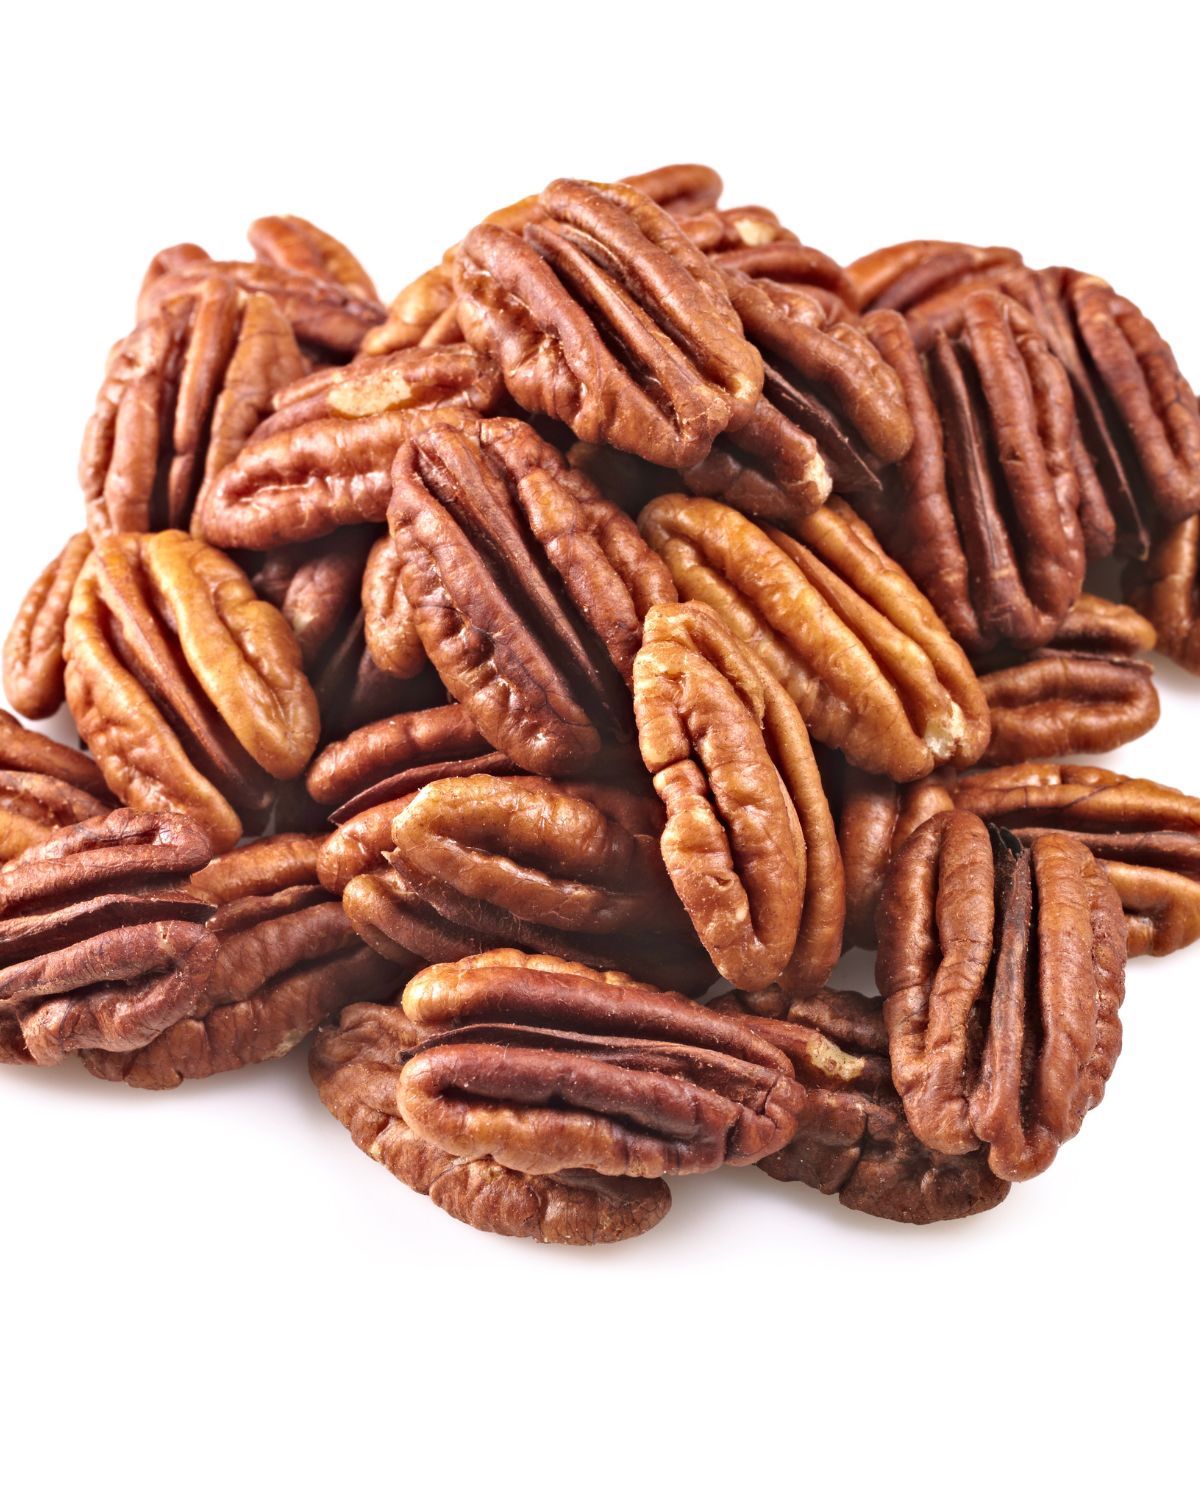 Pecans to make the dish.